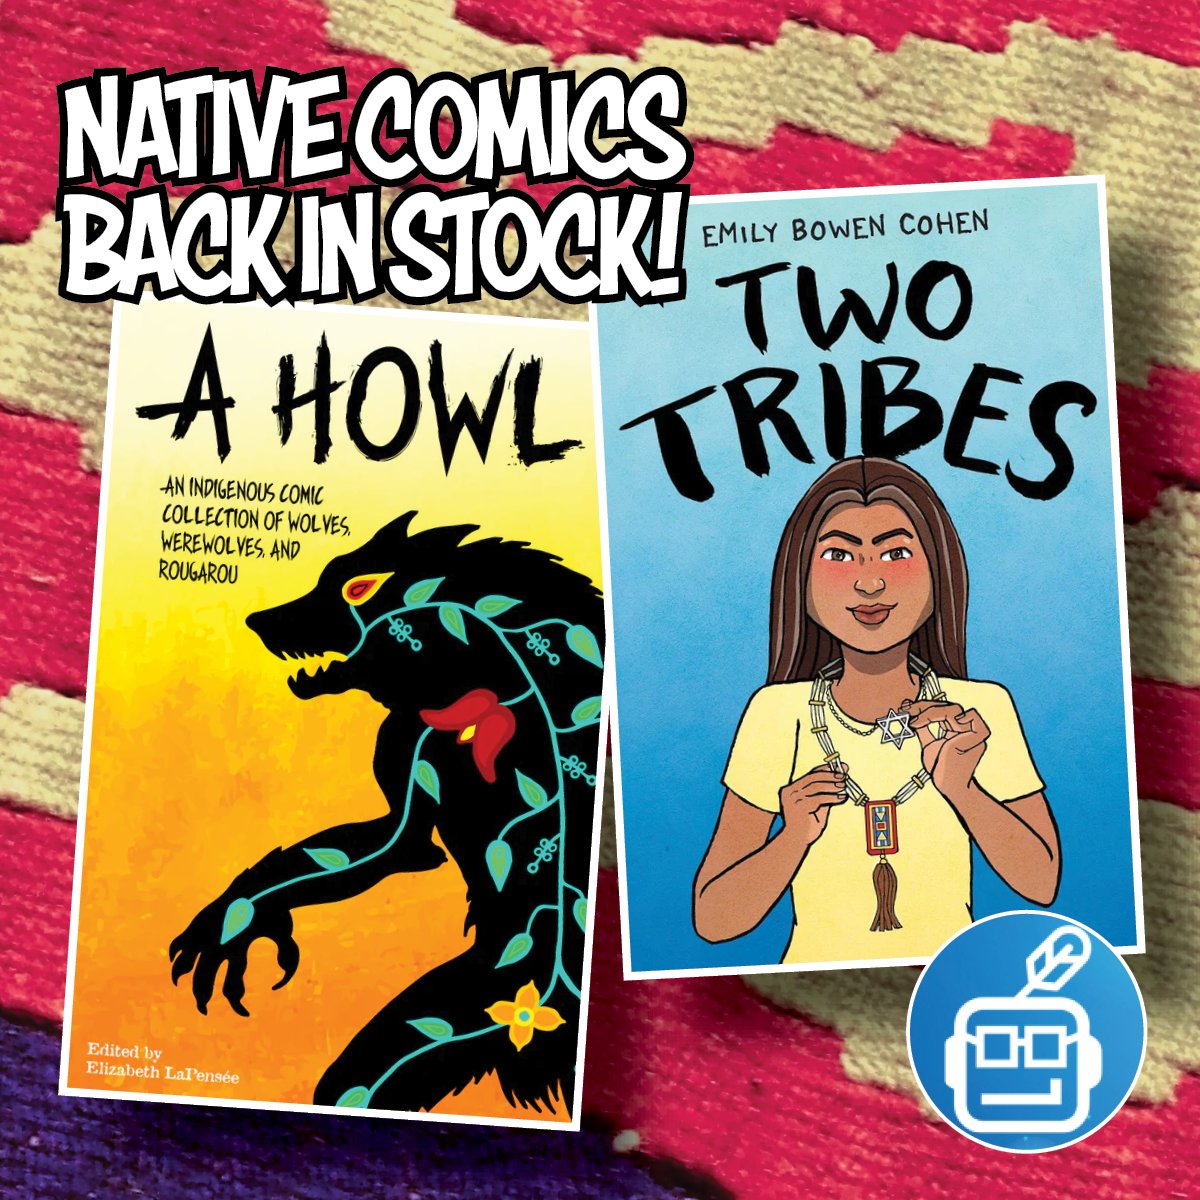 NATIVE COMICS BACK IN STOCK! Check out our selection of Native & Indigenous comics. We have some great new titles & more back in stock! Check out the selection now! 🔗 atcgbooksandcomics.com/collections/na…

#NativeComics #IndigenousStories #NativeCreatives #BuyNative #SupportSmallBiz